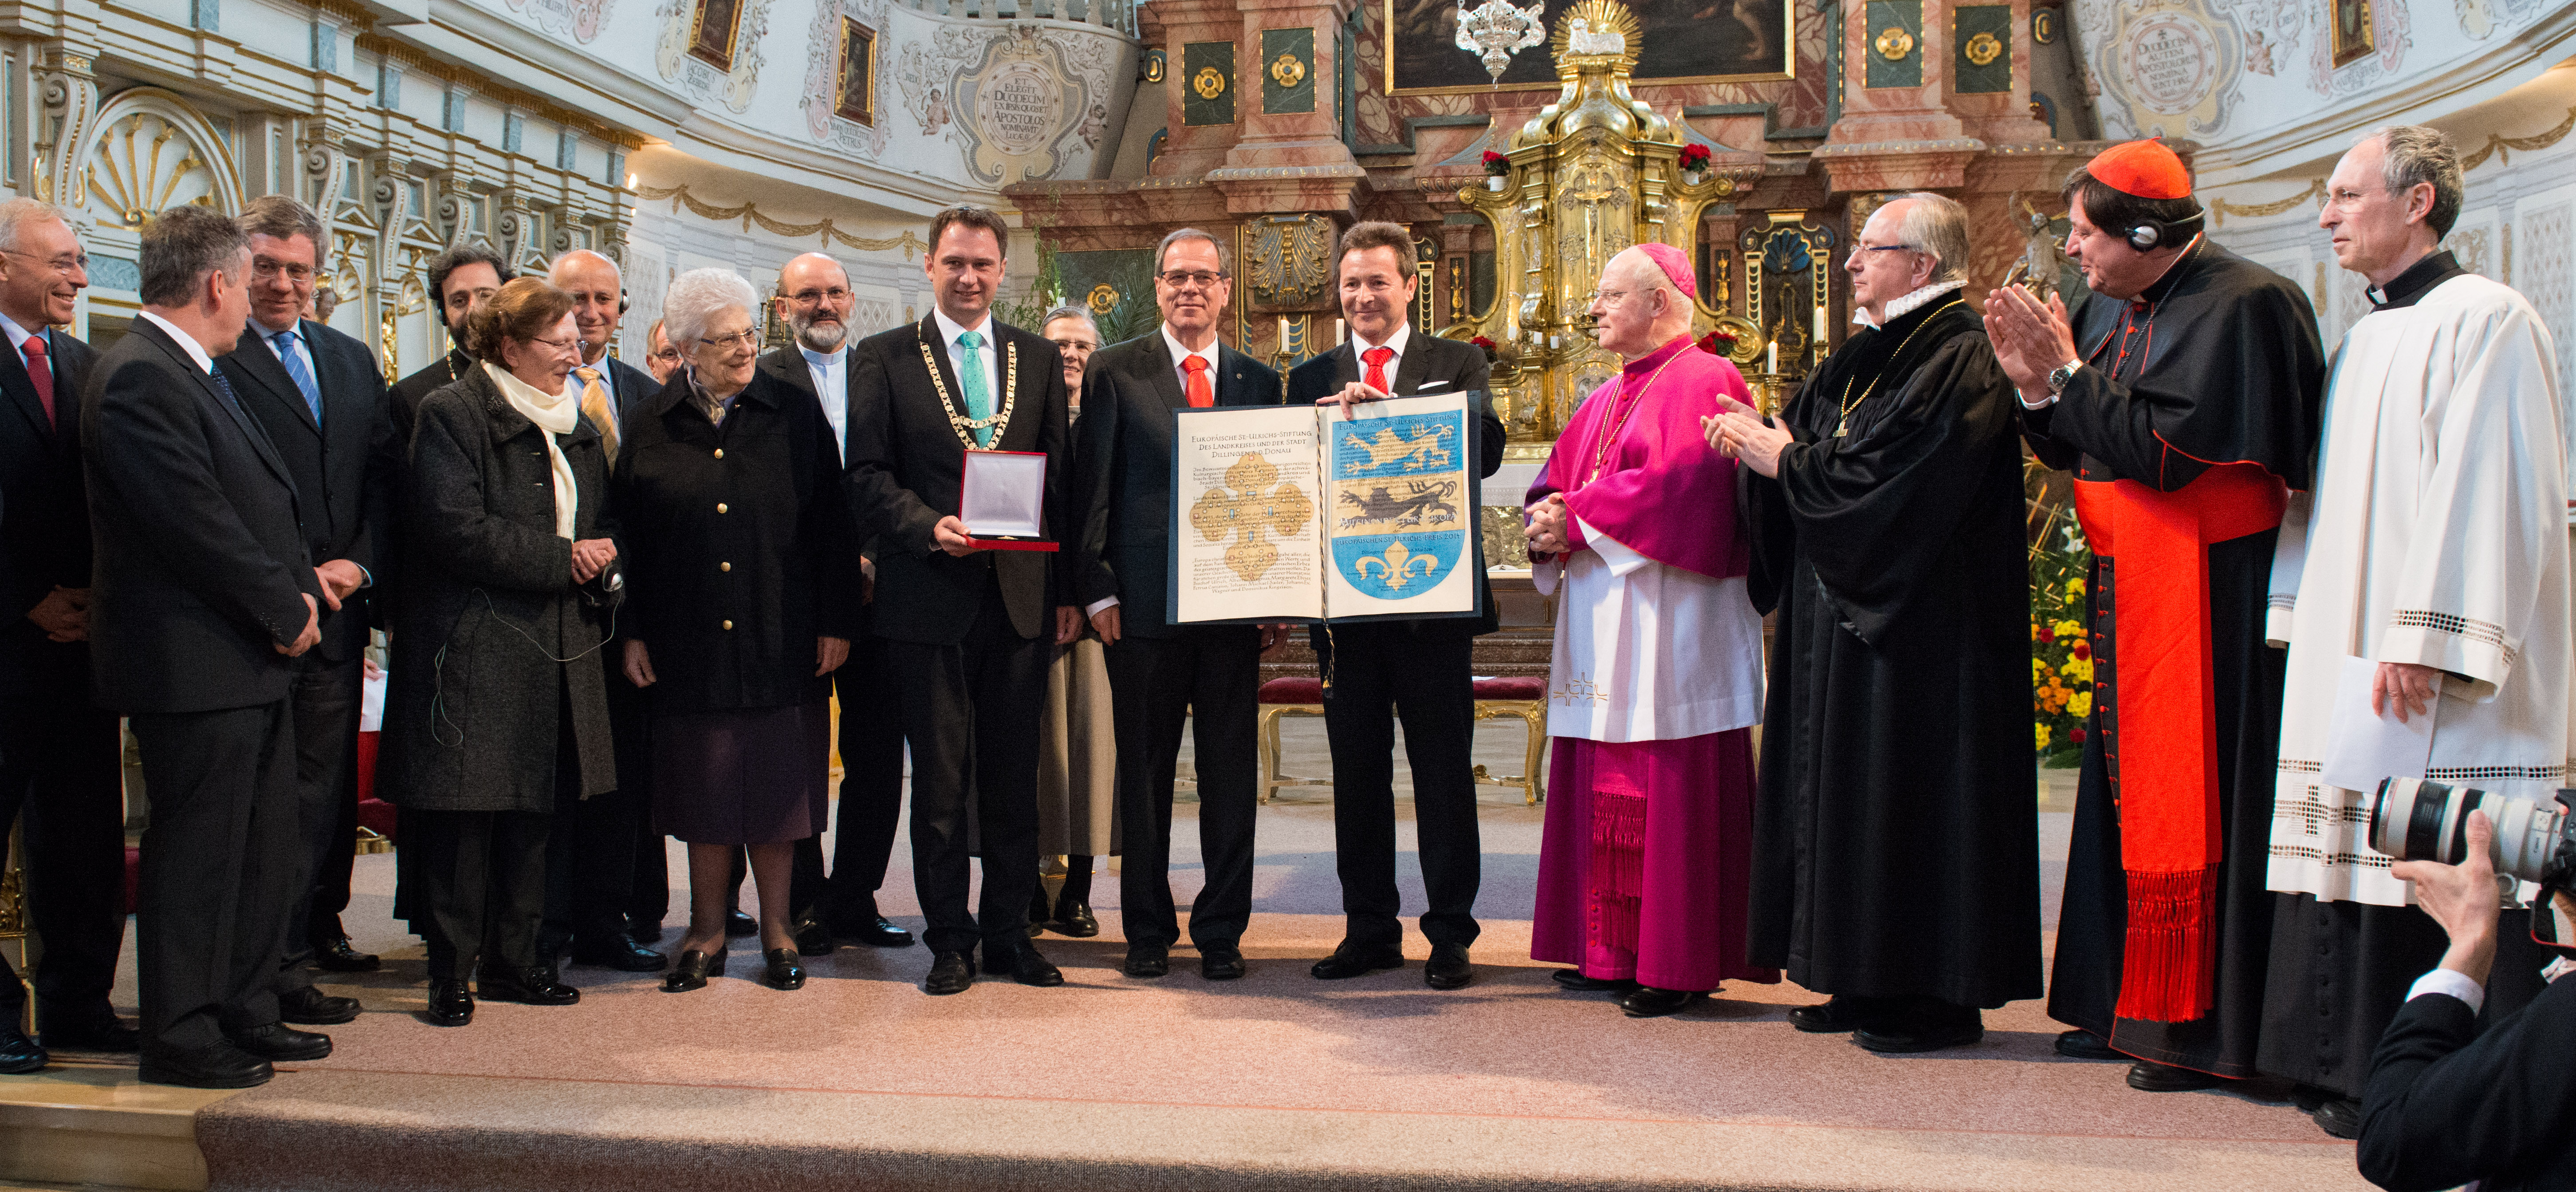 Citation for the European Prize of St. Ulrich to Together for Europe